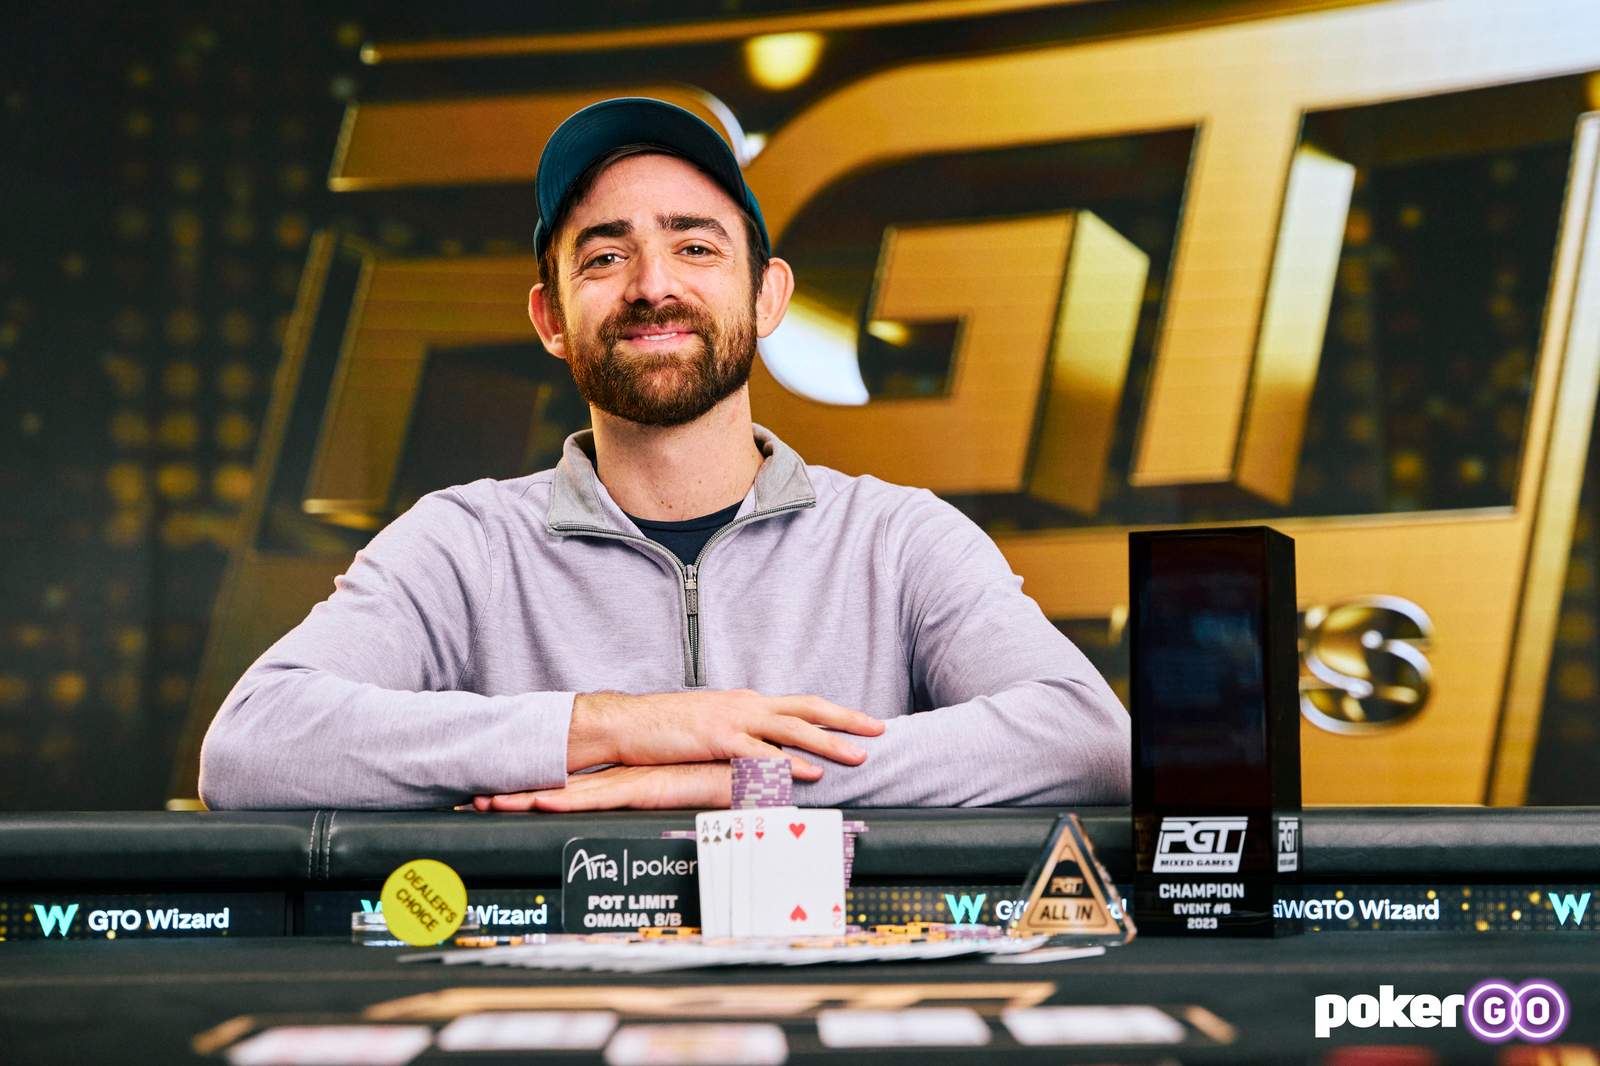 Dylan Weisman Wins PGT Mixed Games II Event #6 for $156,400